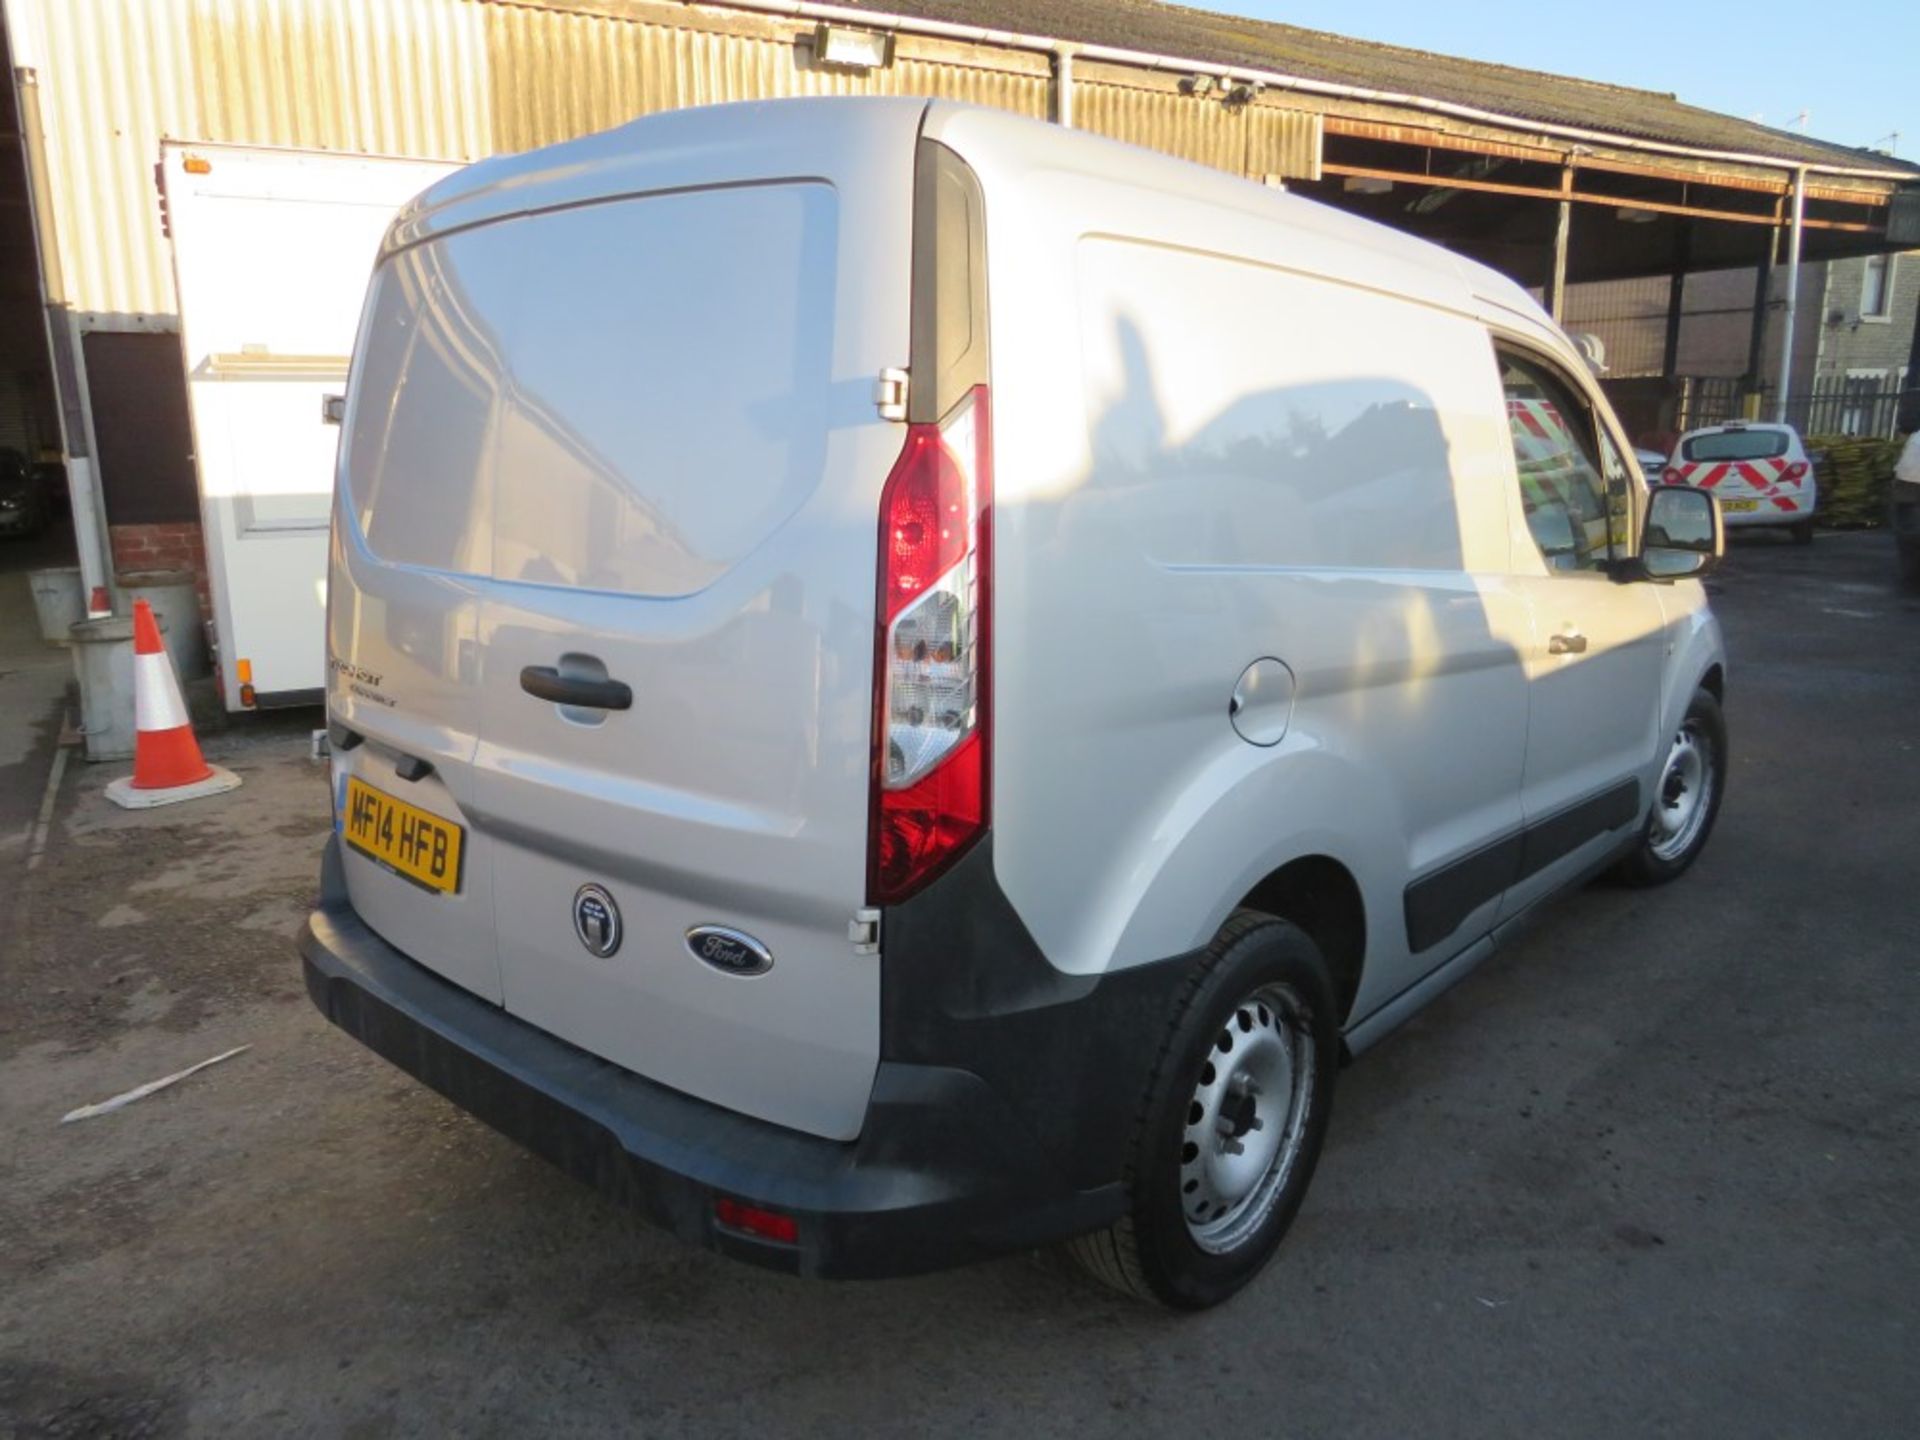 14 reg FORD TRANSIT CONNECT 200, 1ST REG 04/14, TEST 06/20, 116928M WARRANTED, V5 HERE, 1 OWNER FROM - Image 4 of 6